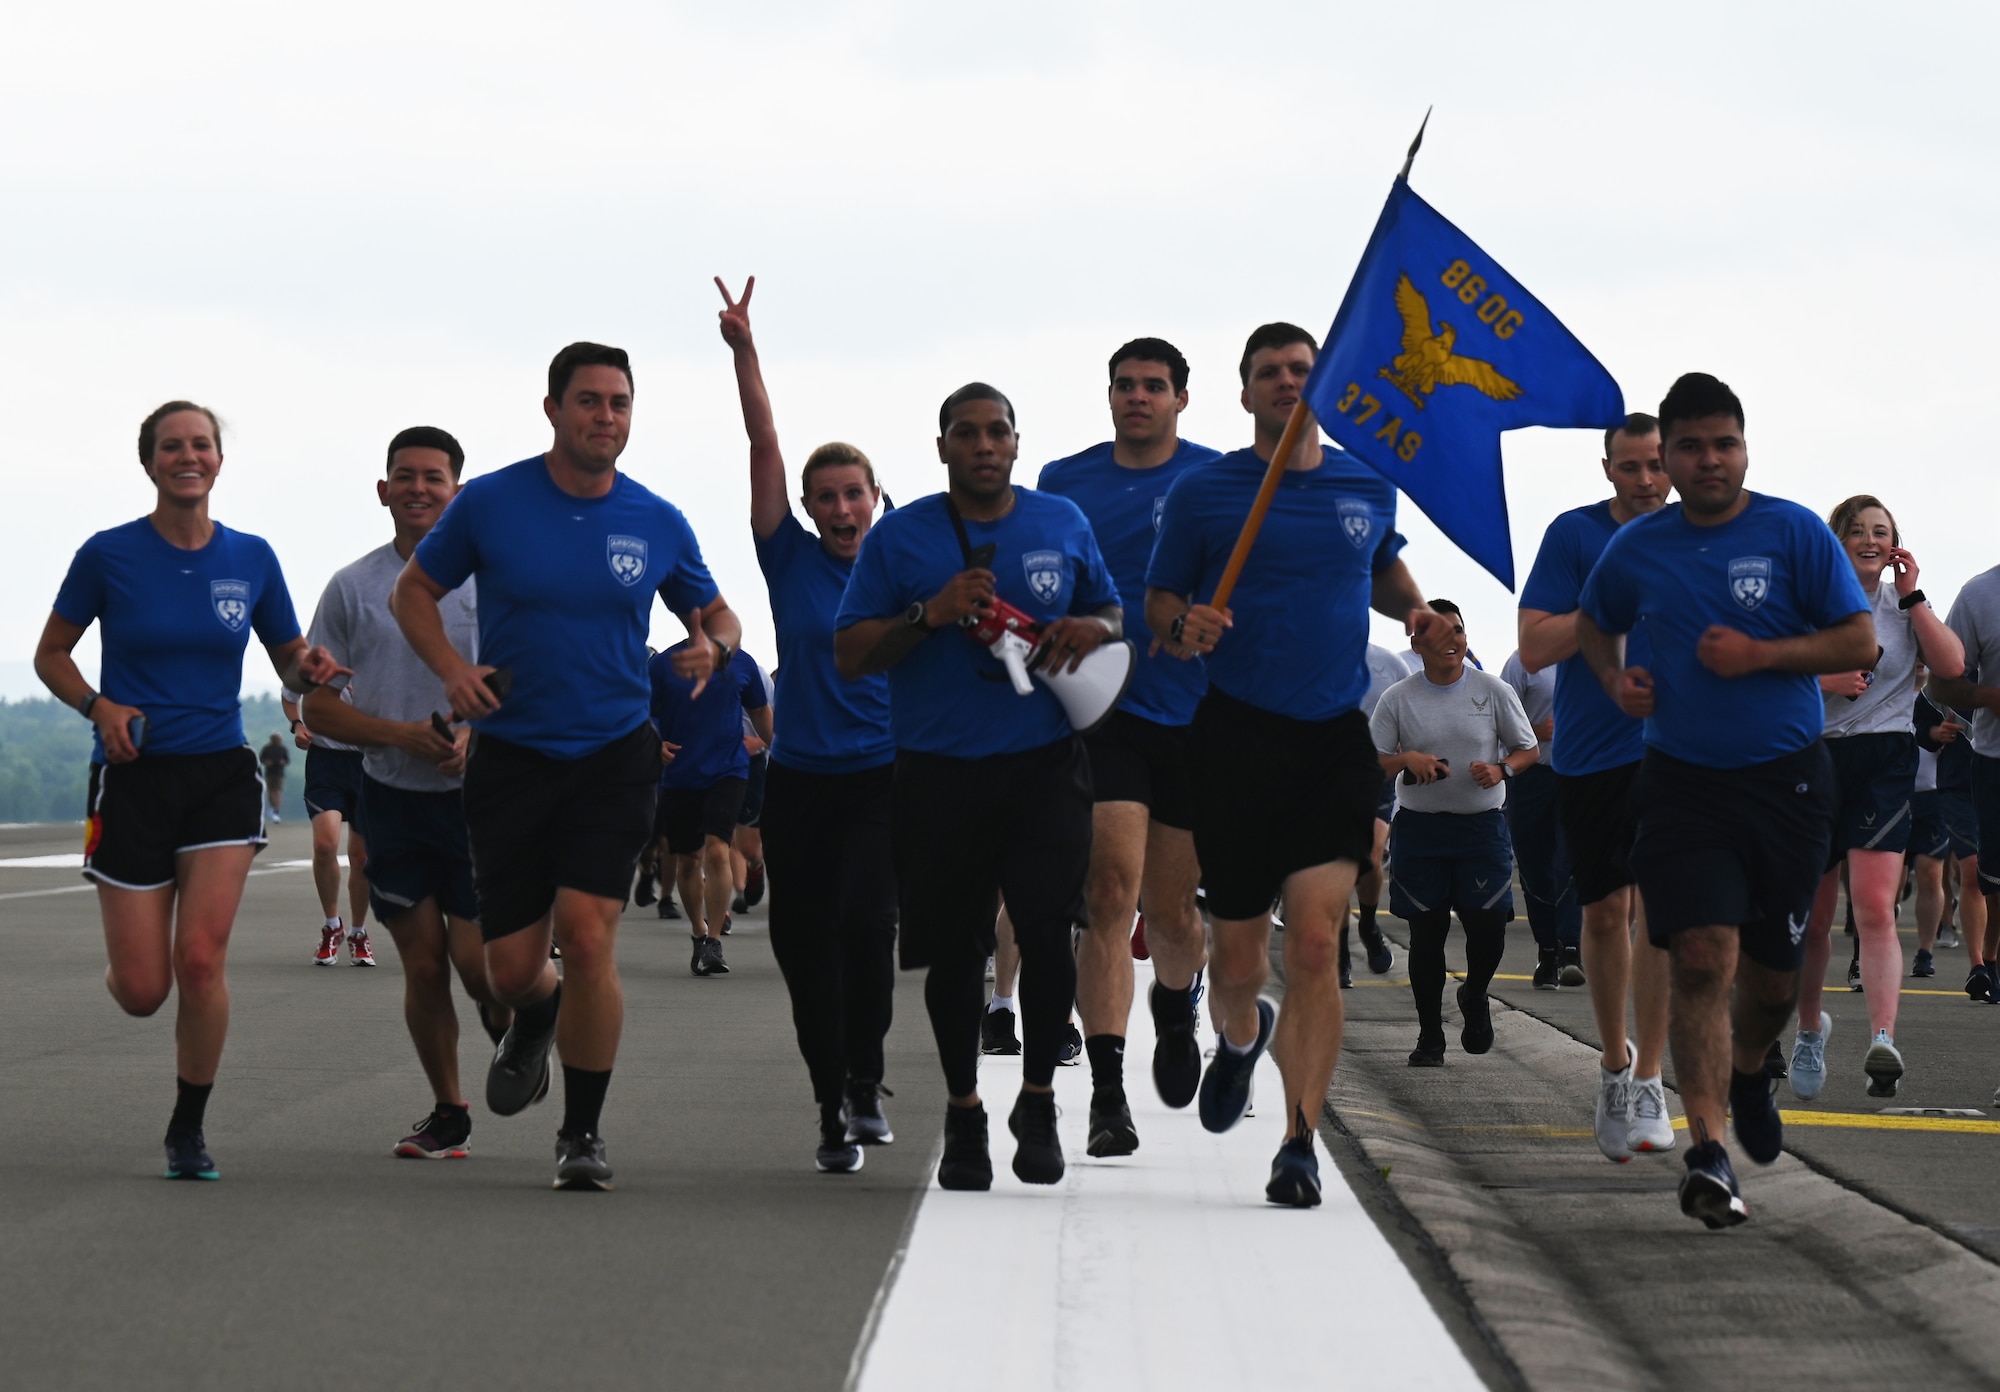 U.S. Air Force Airmen from the 37th Airlift Squadron participate in the RUNway 5K at Ramstein Air Base, Germany, July 1, 2021. Airmen from all over the 86th Airlift Wing participated in the RUNway 5K in order to increase their physical fitness. (U.S. Air Force photo by Senior Airman Thomas Karol)